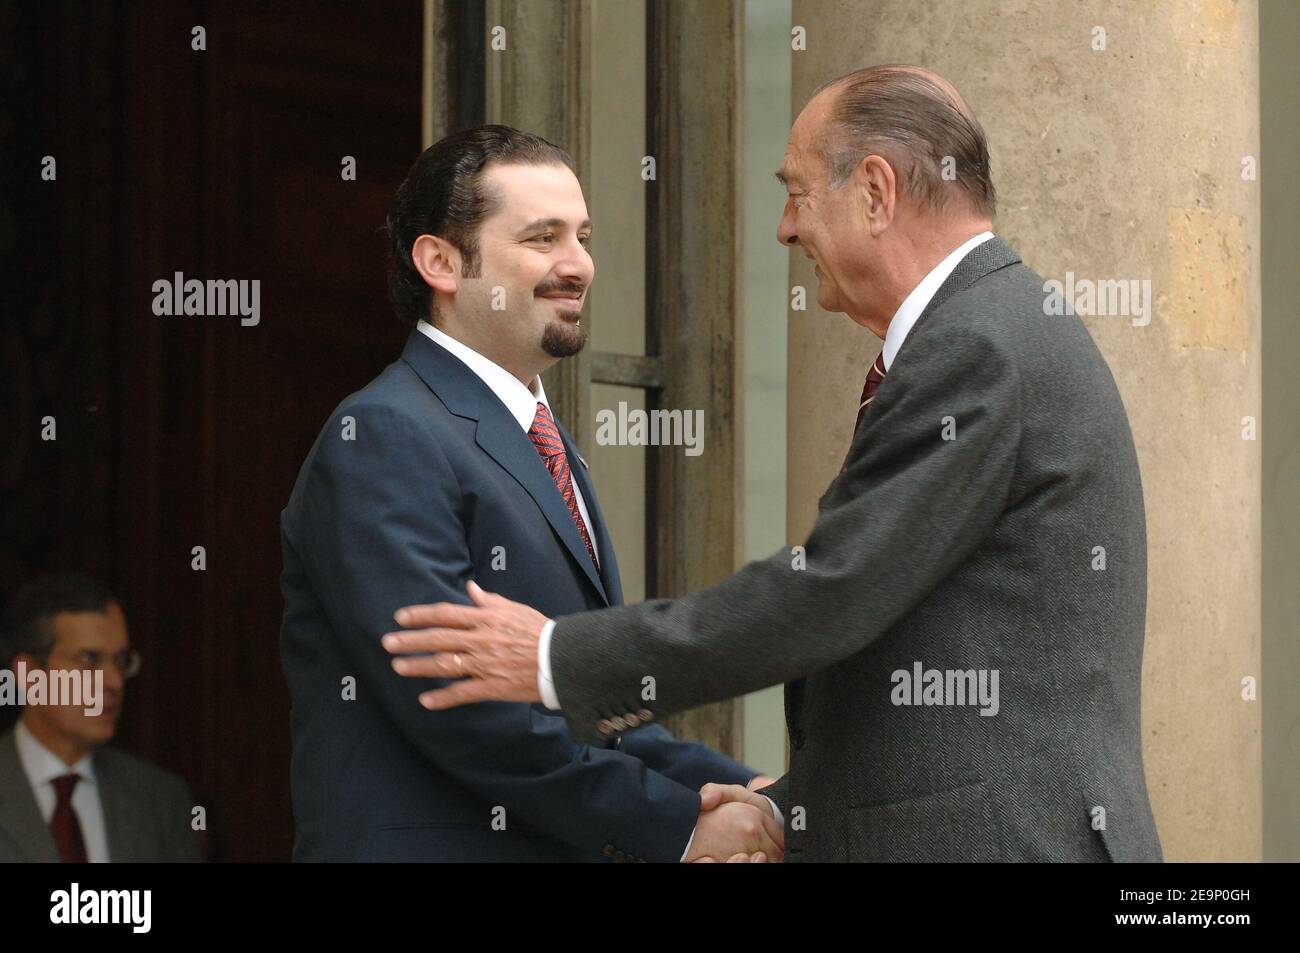 French President Jacques Chirac, receives Saad Hariri, leader of Lebanon's parliamentary majority 'Future' party, and son of the assassinated Prime Minister Rafic Hariri, at the Elysee Palace in Paris, on October 19, 2006. Chirac and Saad Hariri meet to discuss preparations for a new international conference on Lebanon to be held in Paris in January 2007. Photo by Ammar Abd Rabbo/ABACAPRESS.COM Stock Photo